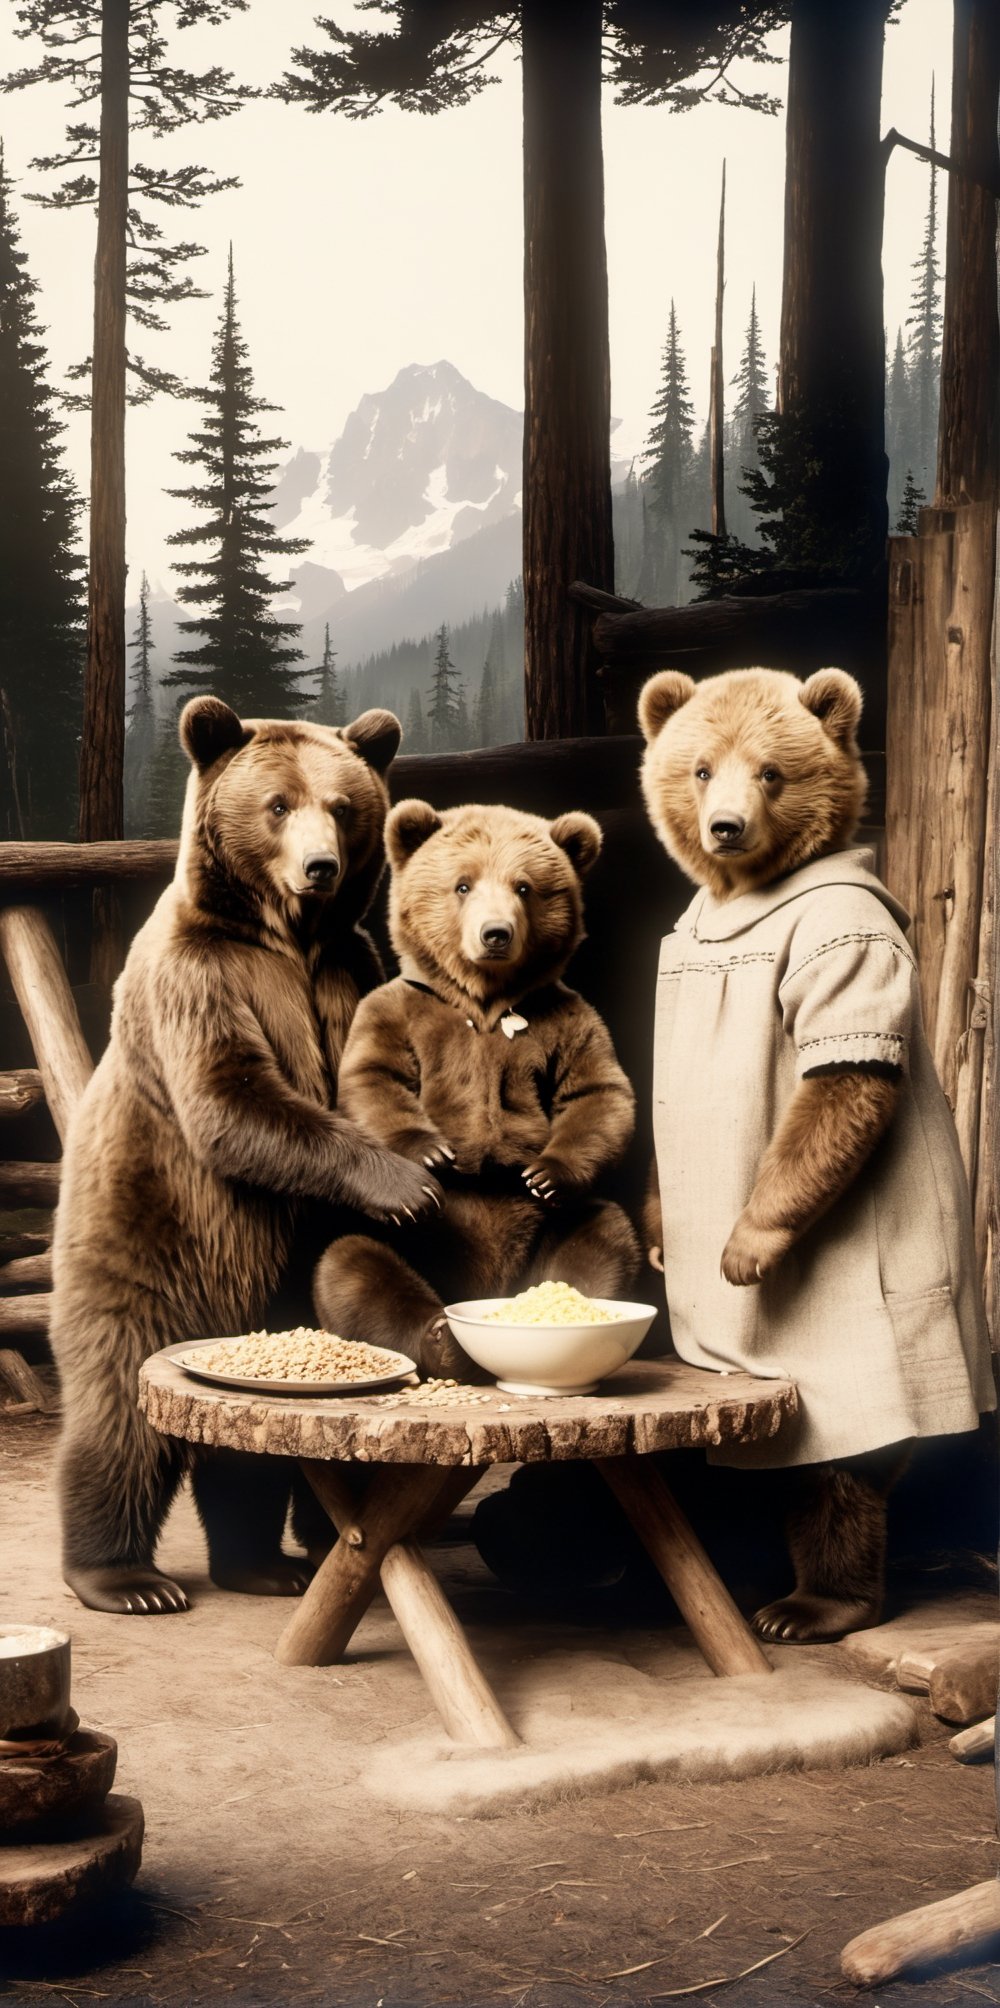 Three bears sit on stumps outside of a cabin. They each have a bowl of porridge in their paws. A girl with golden curly hair approaches the bears to share their porridge. 

8k resolution photorealistic masterpiece, intricately detailed, cinematic lighting, maximalist photoillustration, HD,make_3d